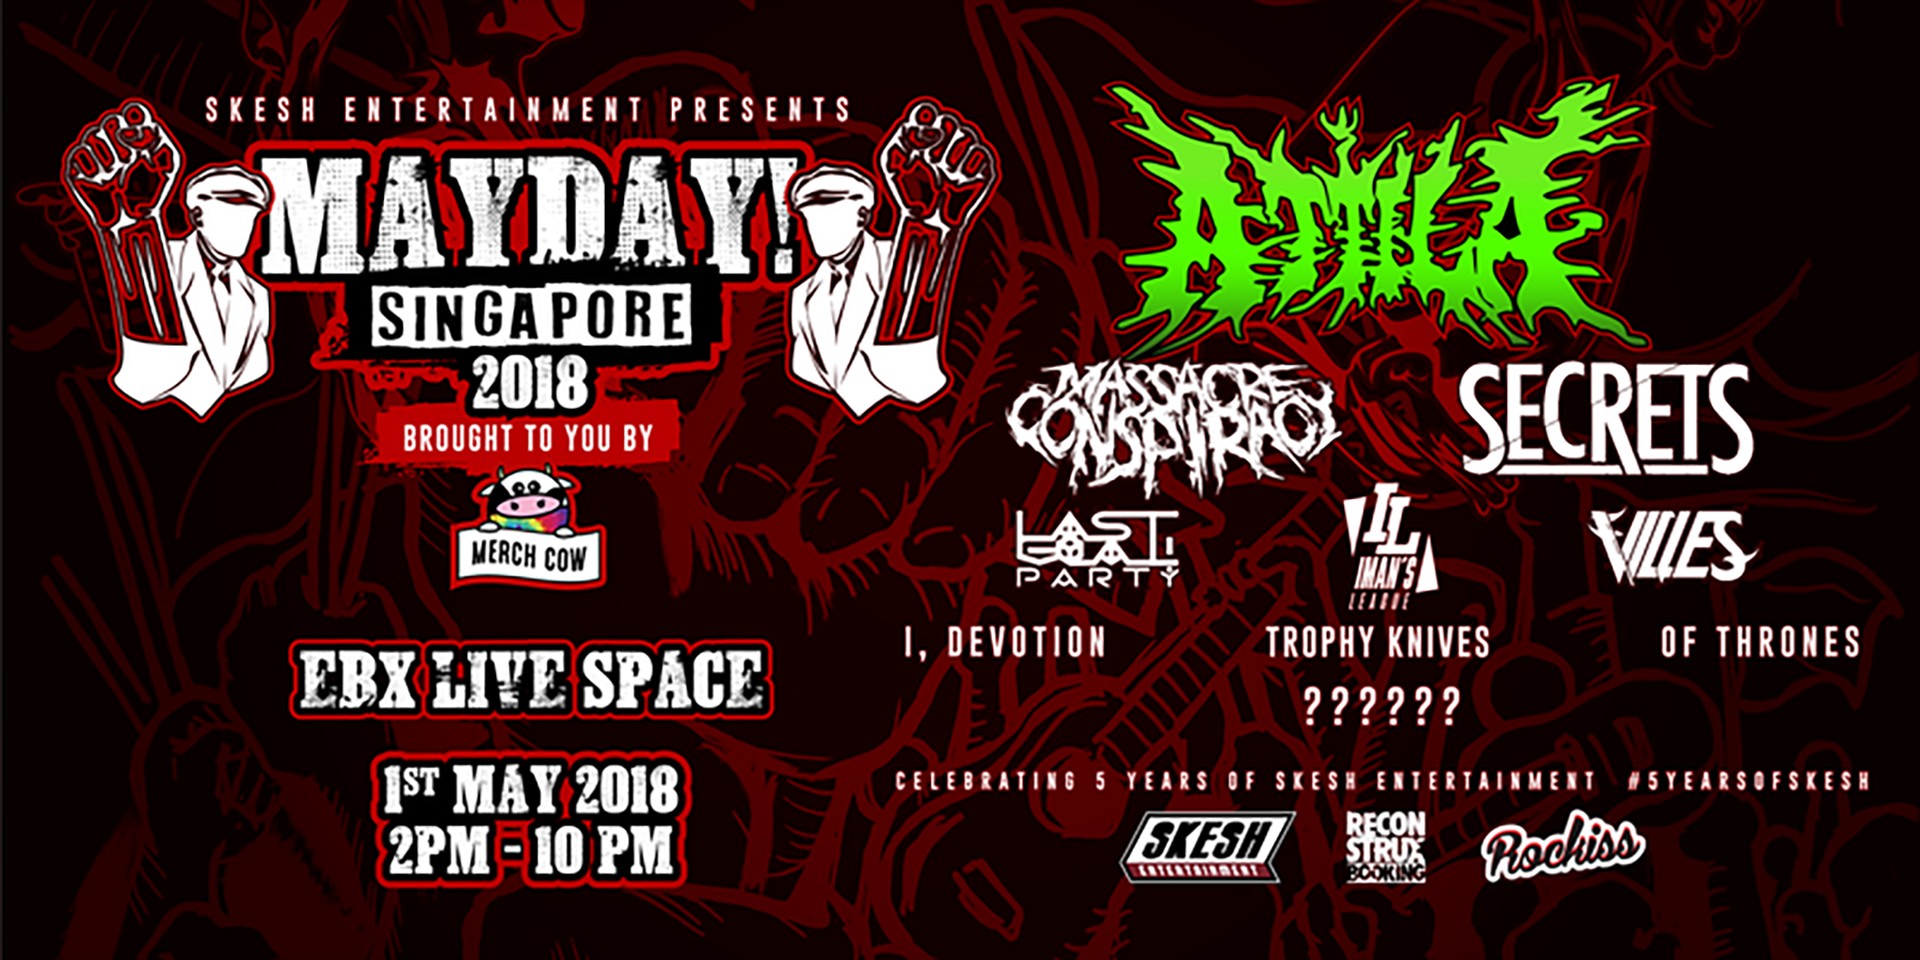 Attila, SECRETS and more to perform at one-day festival MAYDAY! Singapore 2018